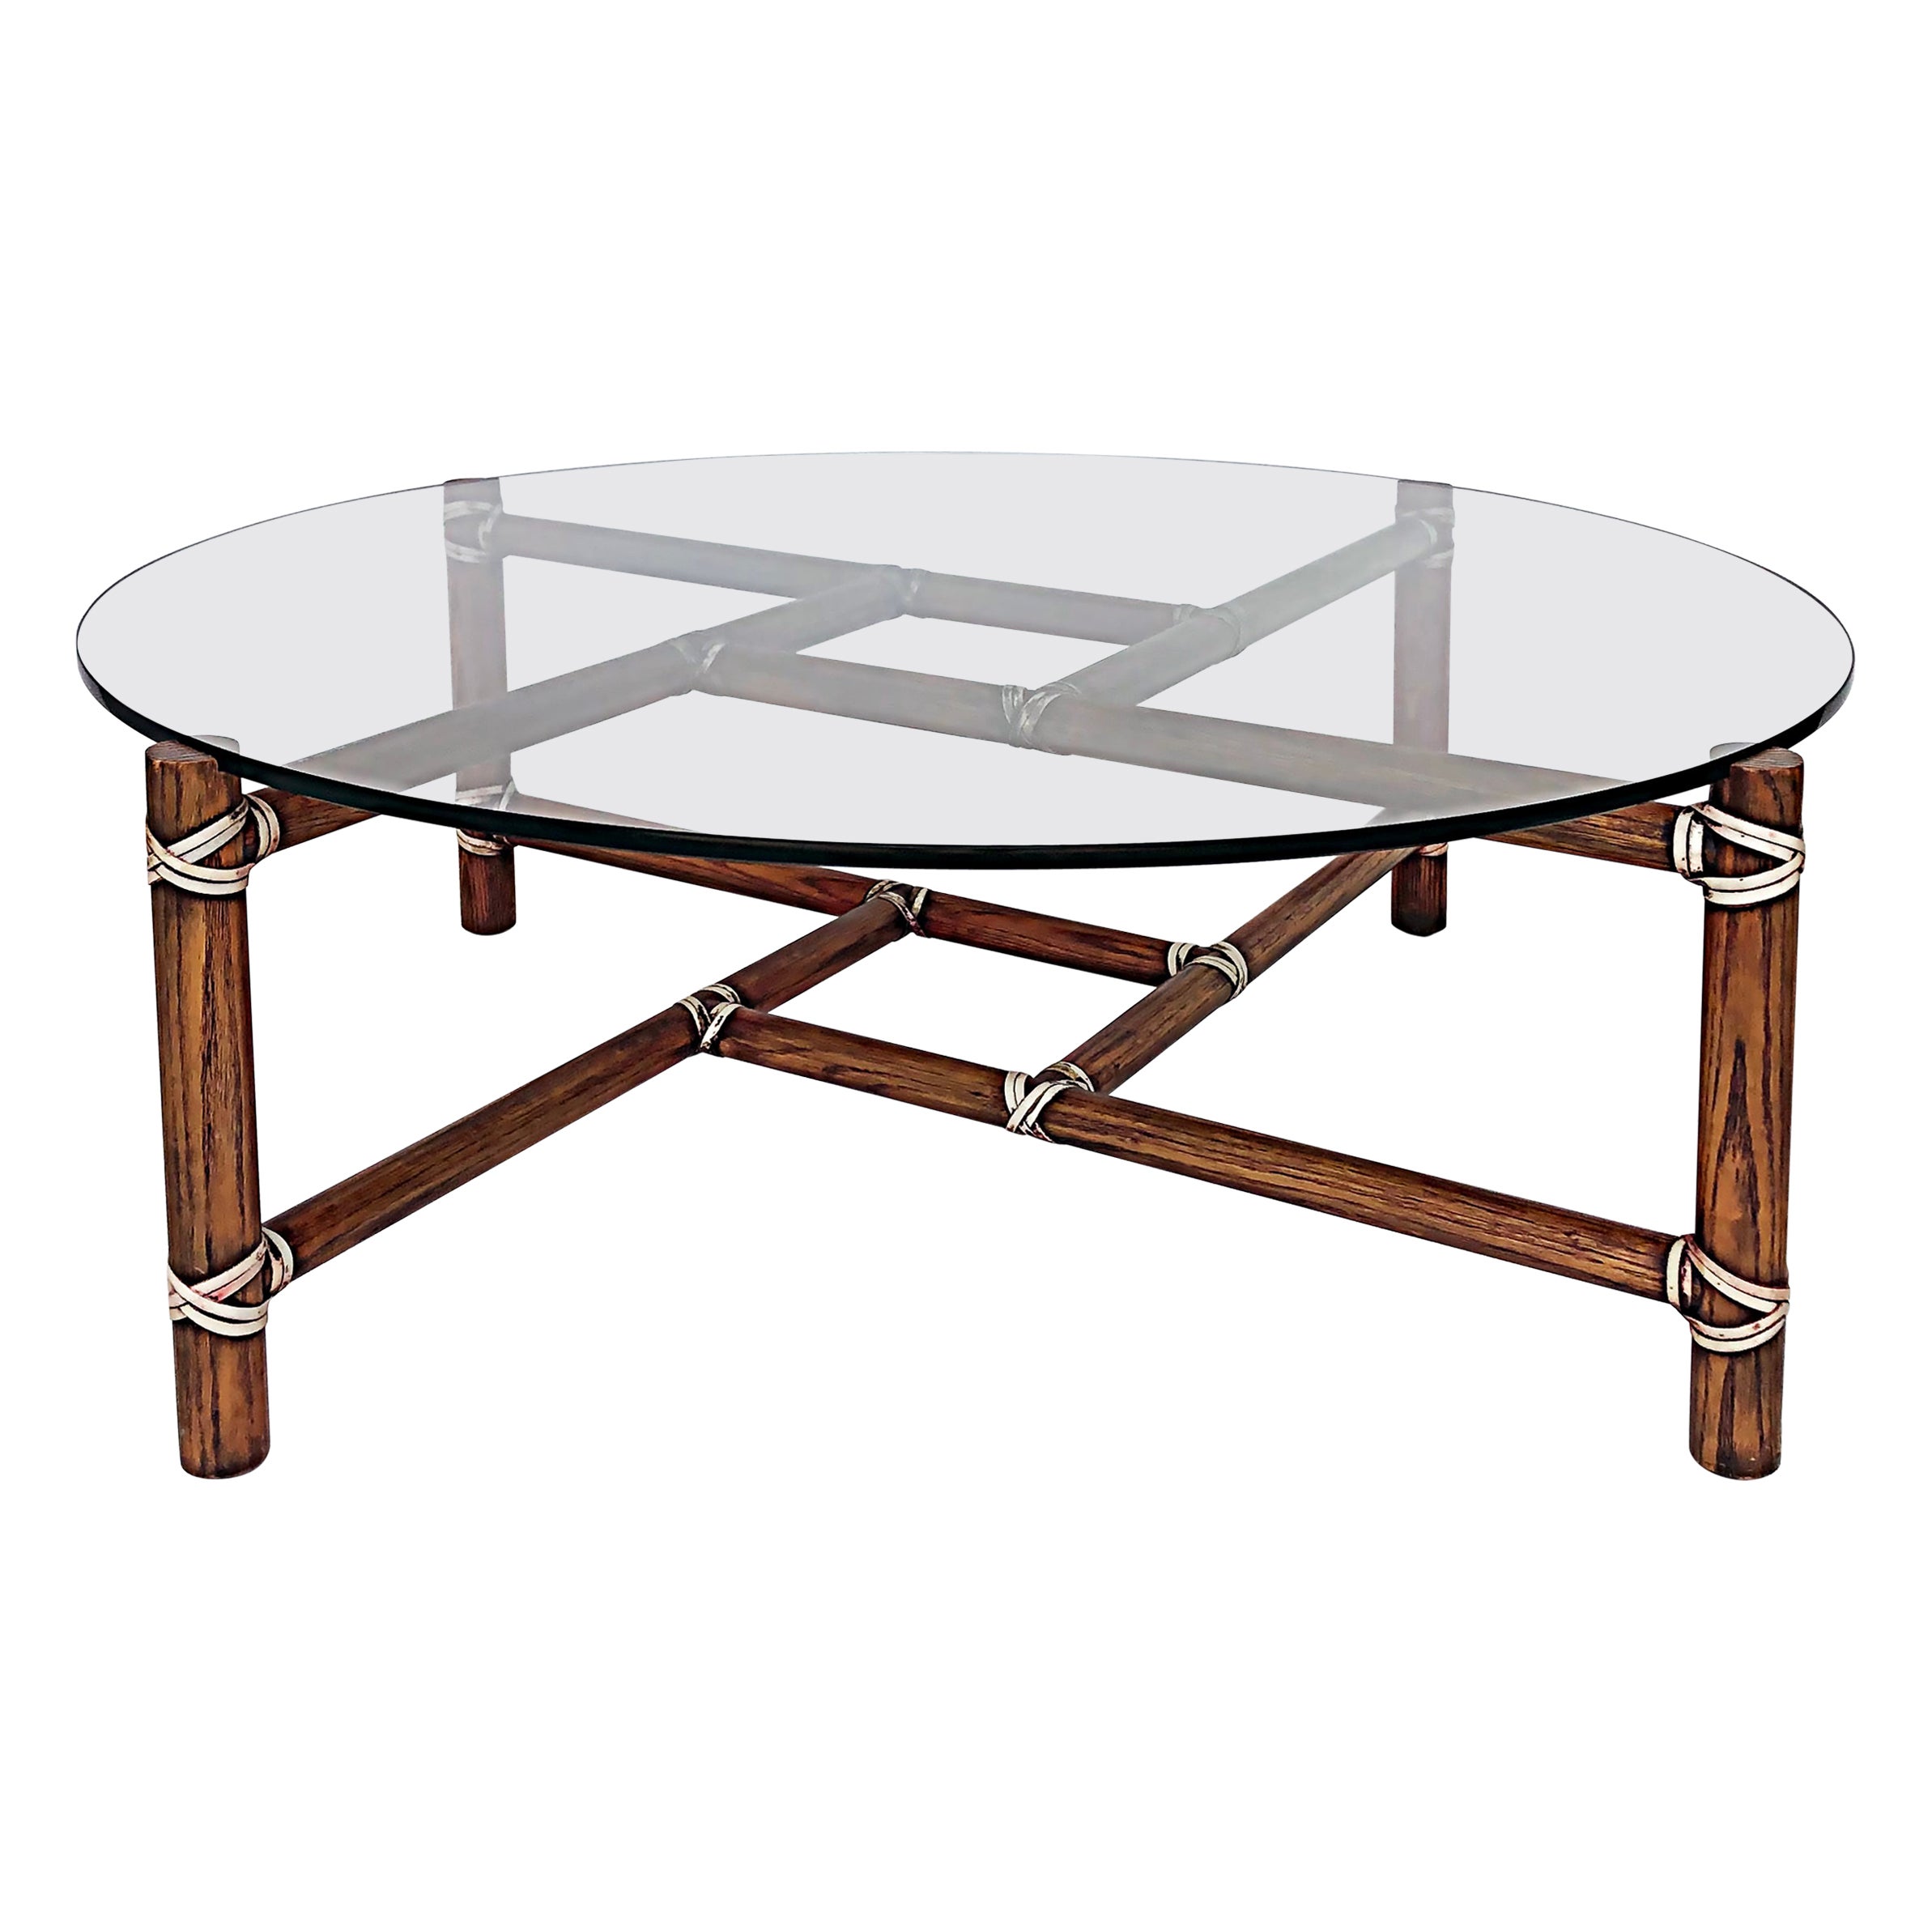 McGuire Funiture San Francisco Round Glass Top Coffee Table with Rawhide Straps For Sale